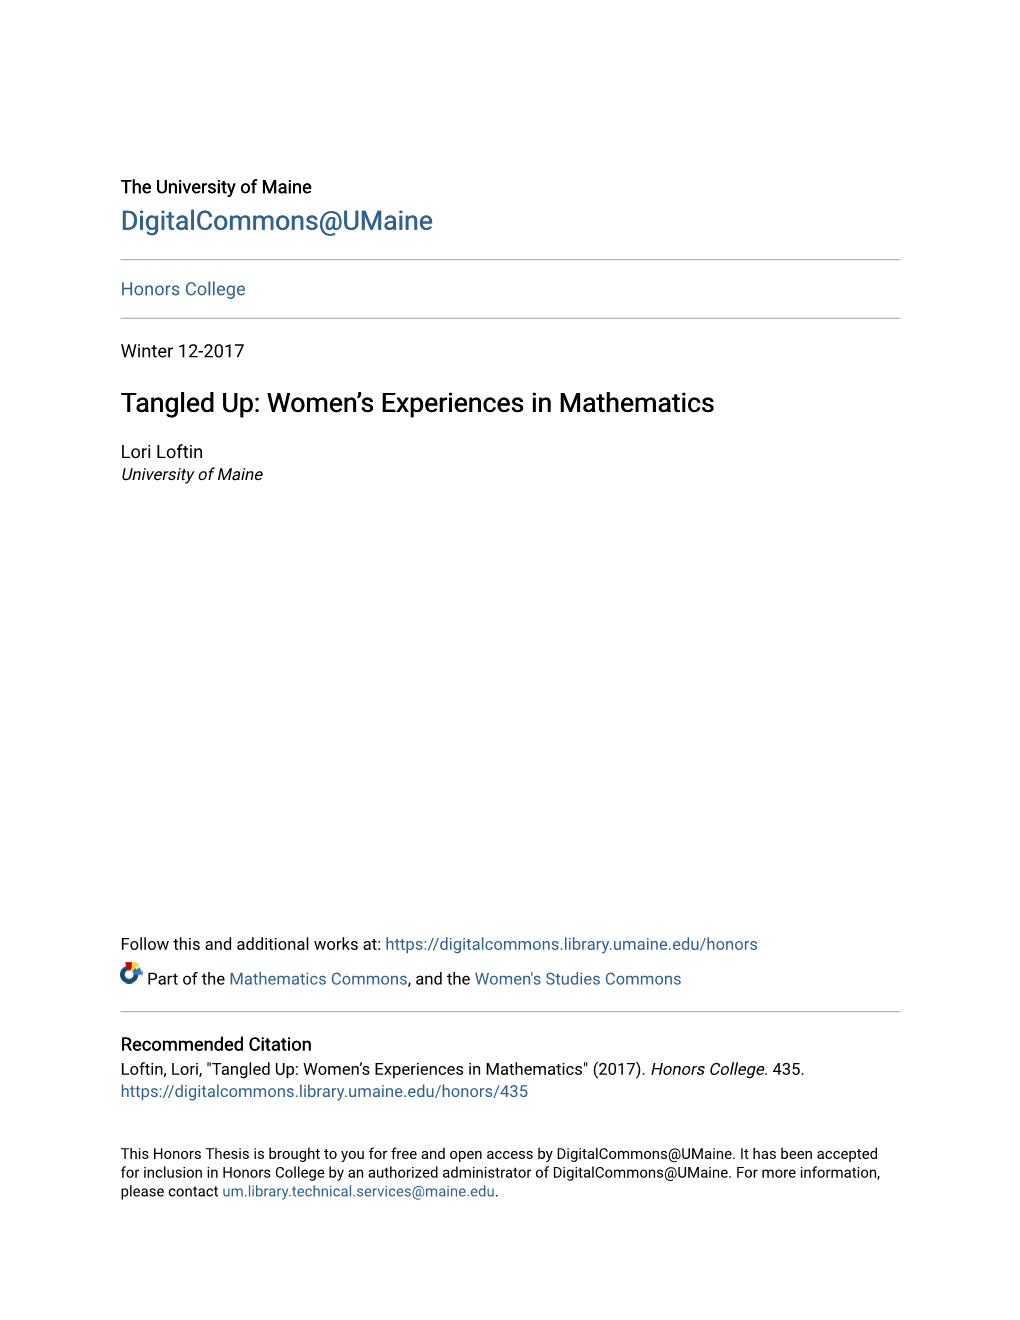 Tangled Up: Women's Experiences in Mathematics